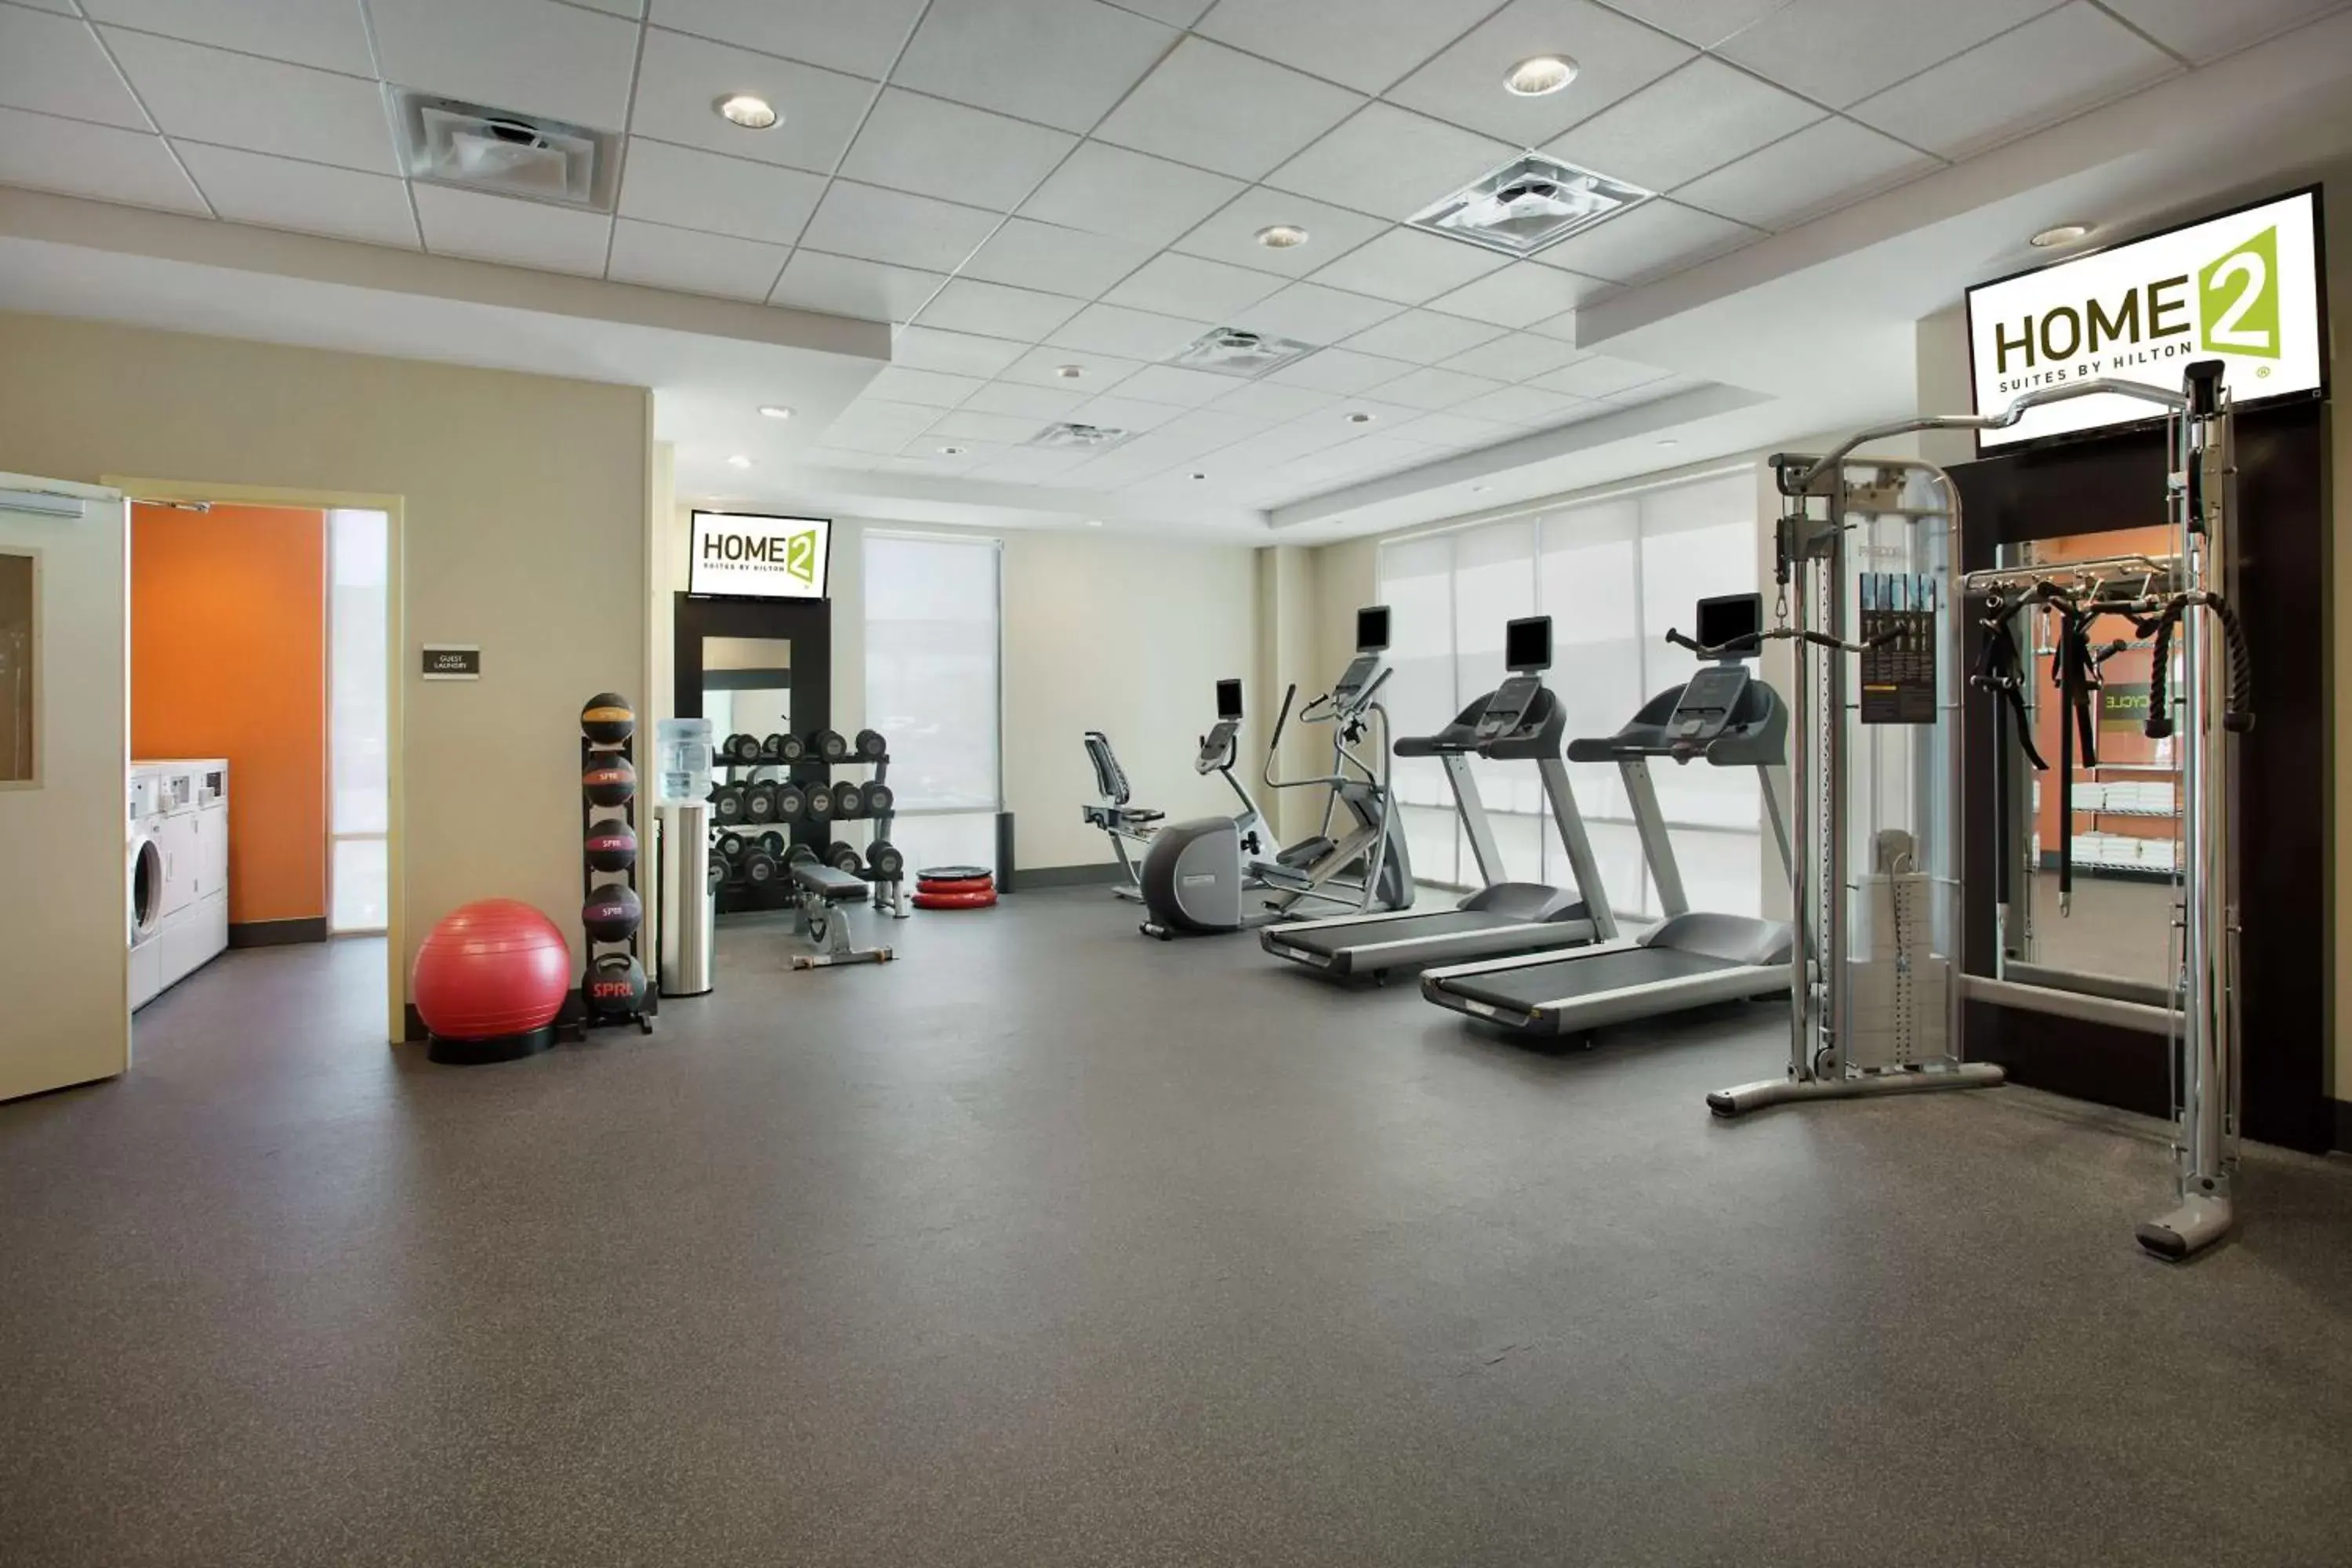 Fitness centre/facilities, Fitness Center/Facilities in Home2 Suites by Hilton San Antonio Airport, TX